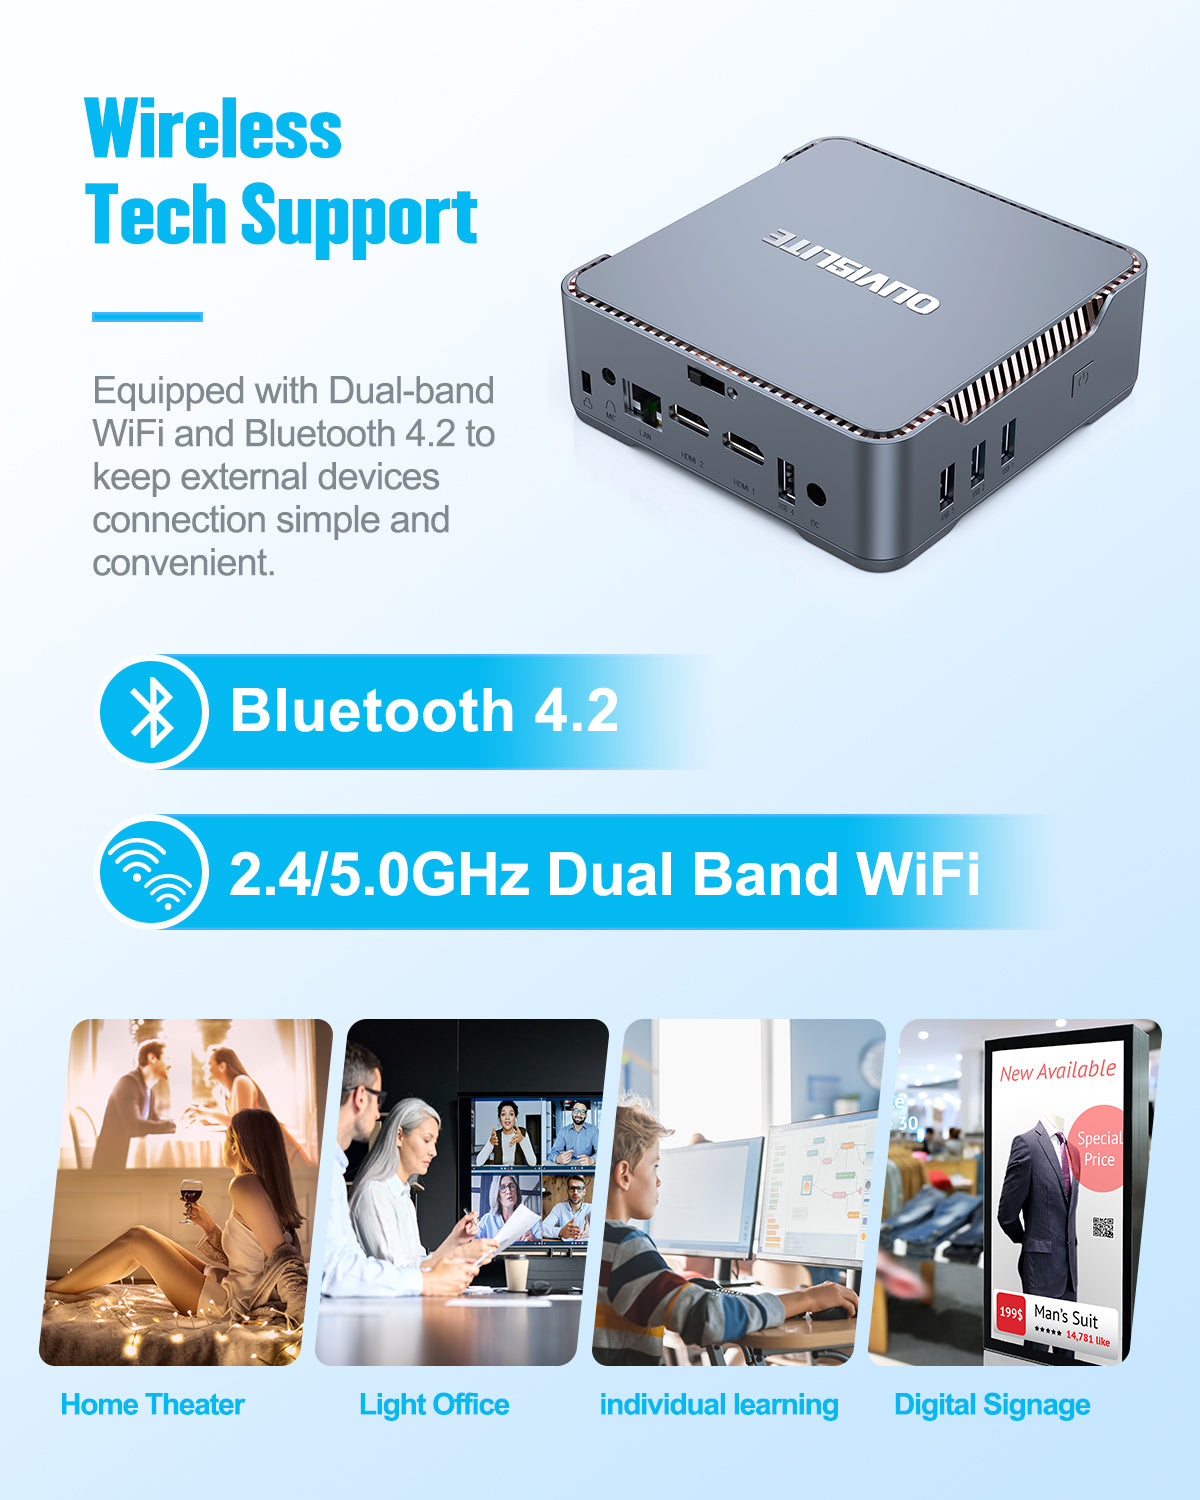 Mini Computer 8GB DDR3 128GB SSD Ιntel Celeron N3350(Up to 2.4GHz) Mini PC Desktop Computer equiped with Windows 10 Pro 4K HDMI Triple Display 2.4G/5G WiFi, BT 4.2, Gigabit Ethernet for Home Business